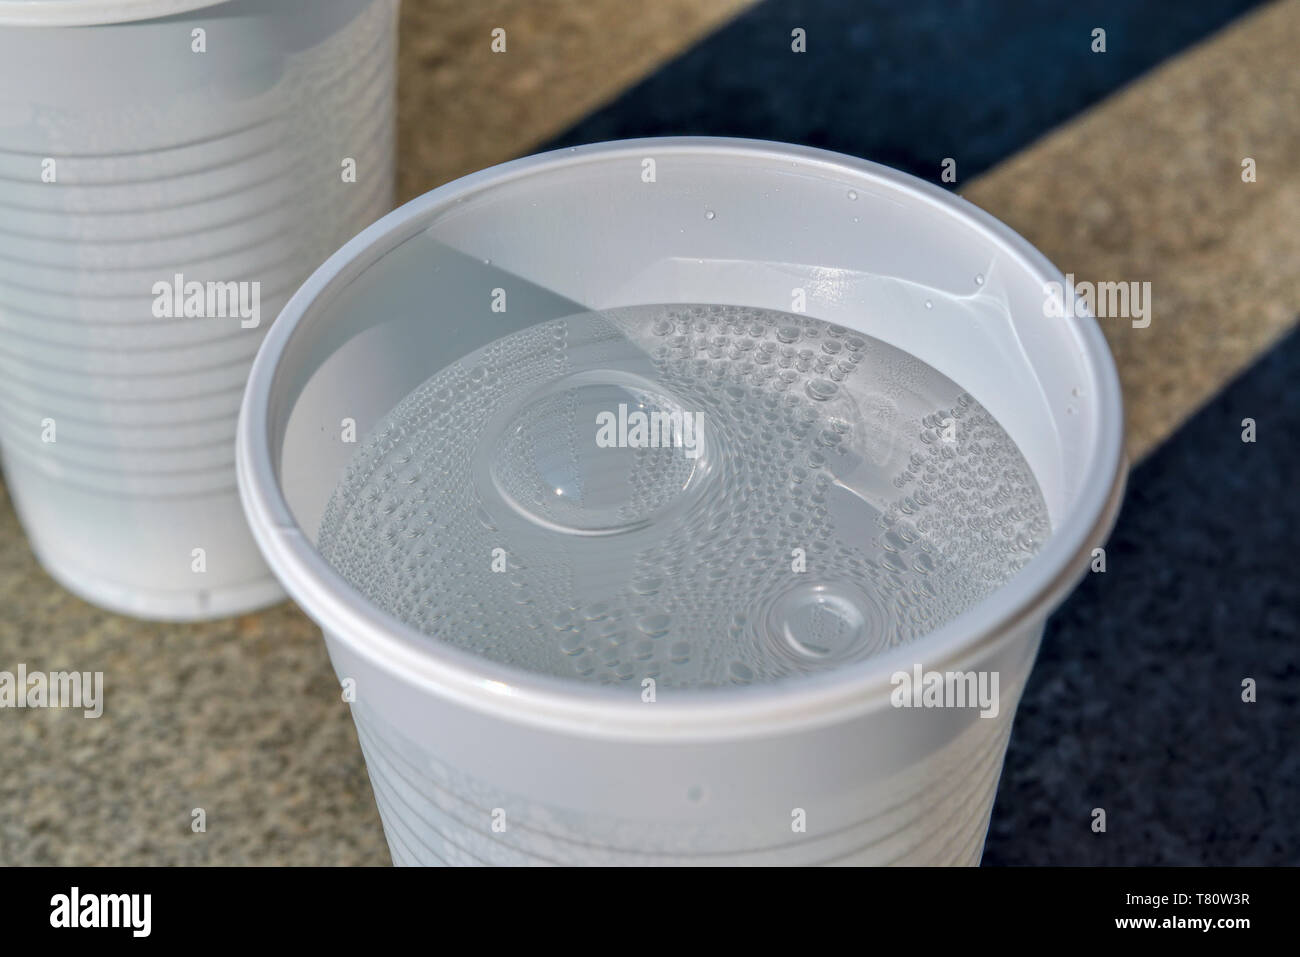 https://c8.alamy.com/comp/T80W3R/white-plastic-cup-with-cold-sparkling-mineral-water-against-a-stone-countertop-T80W3R.jpg